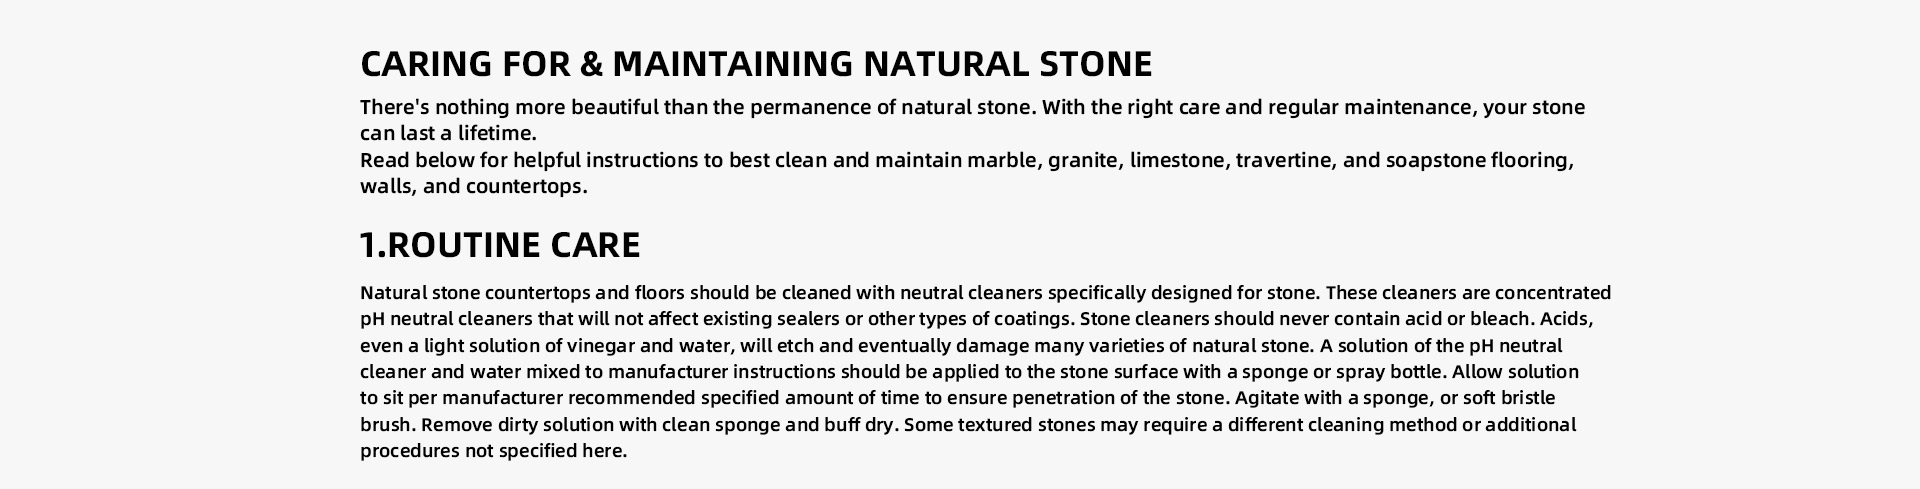 CARING FOR & MAINTAINING NATURAL STONE There's nothing more beautiful than the permanence of natural stone. With the right care and regular maintenance, your stone can last a lifetime.   Read below for helpful instructions to best clean and maintain marble, granite, limestone, travertine, and soapstone flooring, walls, and countertops. ROUTINE CARE Natural stone countertops and floors should be cleaned with neutral cleaners specifically designed for stone. These cleaners are concentrated pH neutral cleaners that will not affect existing sealers or other types of coatings. Stone cleaners should never contain acid or bleach. Acids, even a light solution of vinegar and water, will etch and eventually damage many varieties of natural stone. A solution of the pH neutral cleaner and water mixed to manufacturer instructions should be applied to the stone surface with a sponge or spray bottle. Allow solution to sit per manufacturer recommended specified amount of time to ensure penetration of the stone. Agitate with a sponge, or soft bristle brush. Remove dirty solution with clean sponge and buff dry. Some textured stones may require a different cleaning method or additional procedures not specified here. 